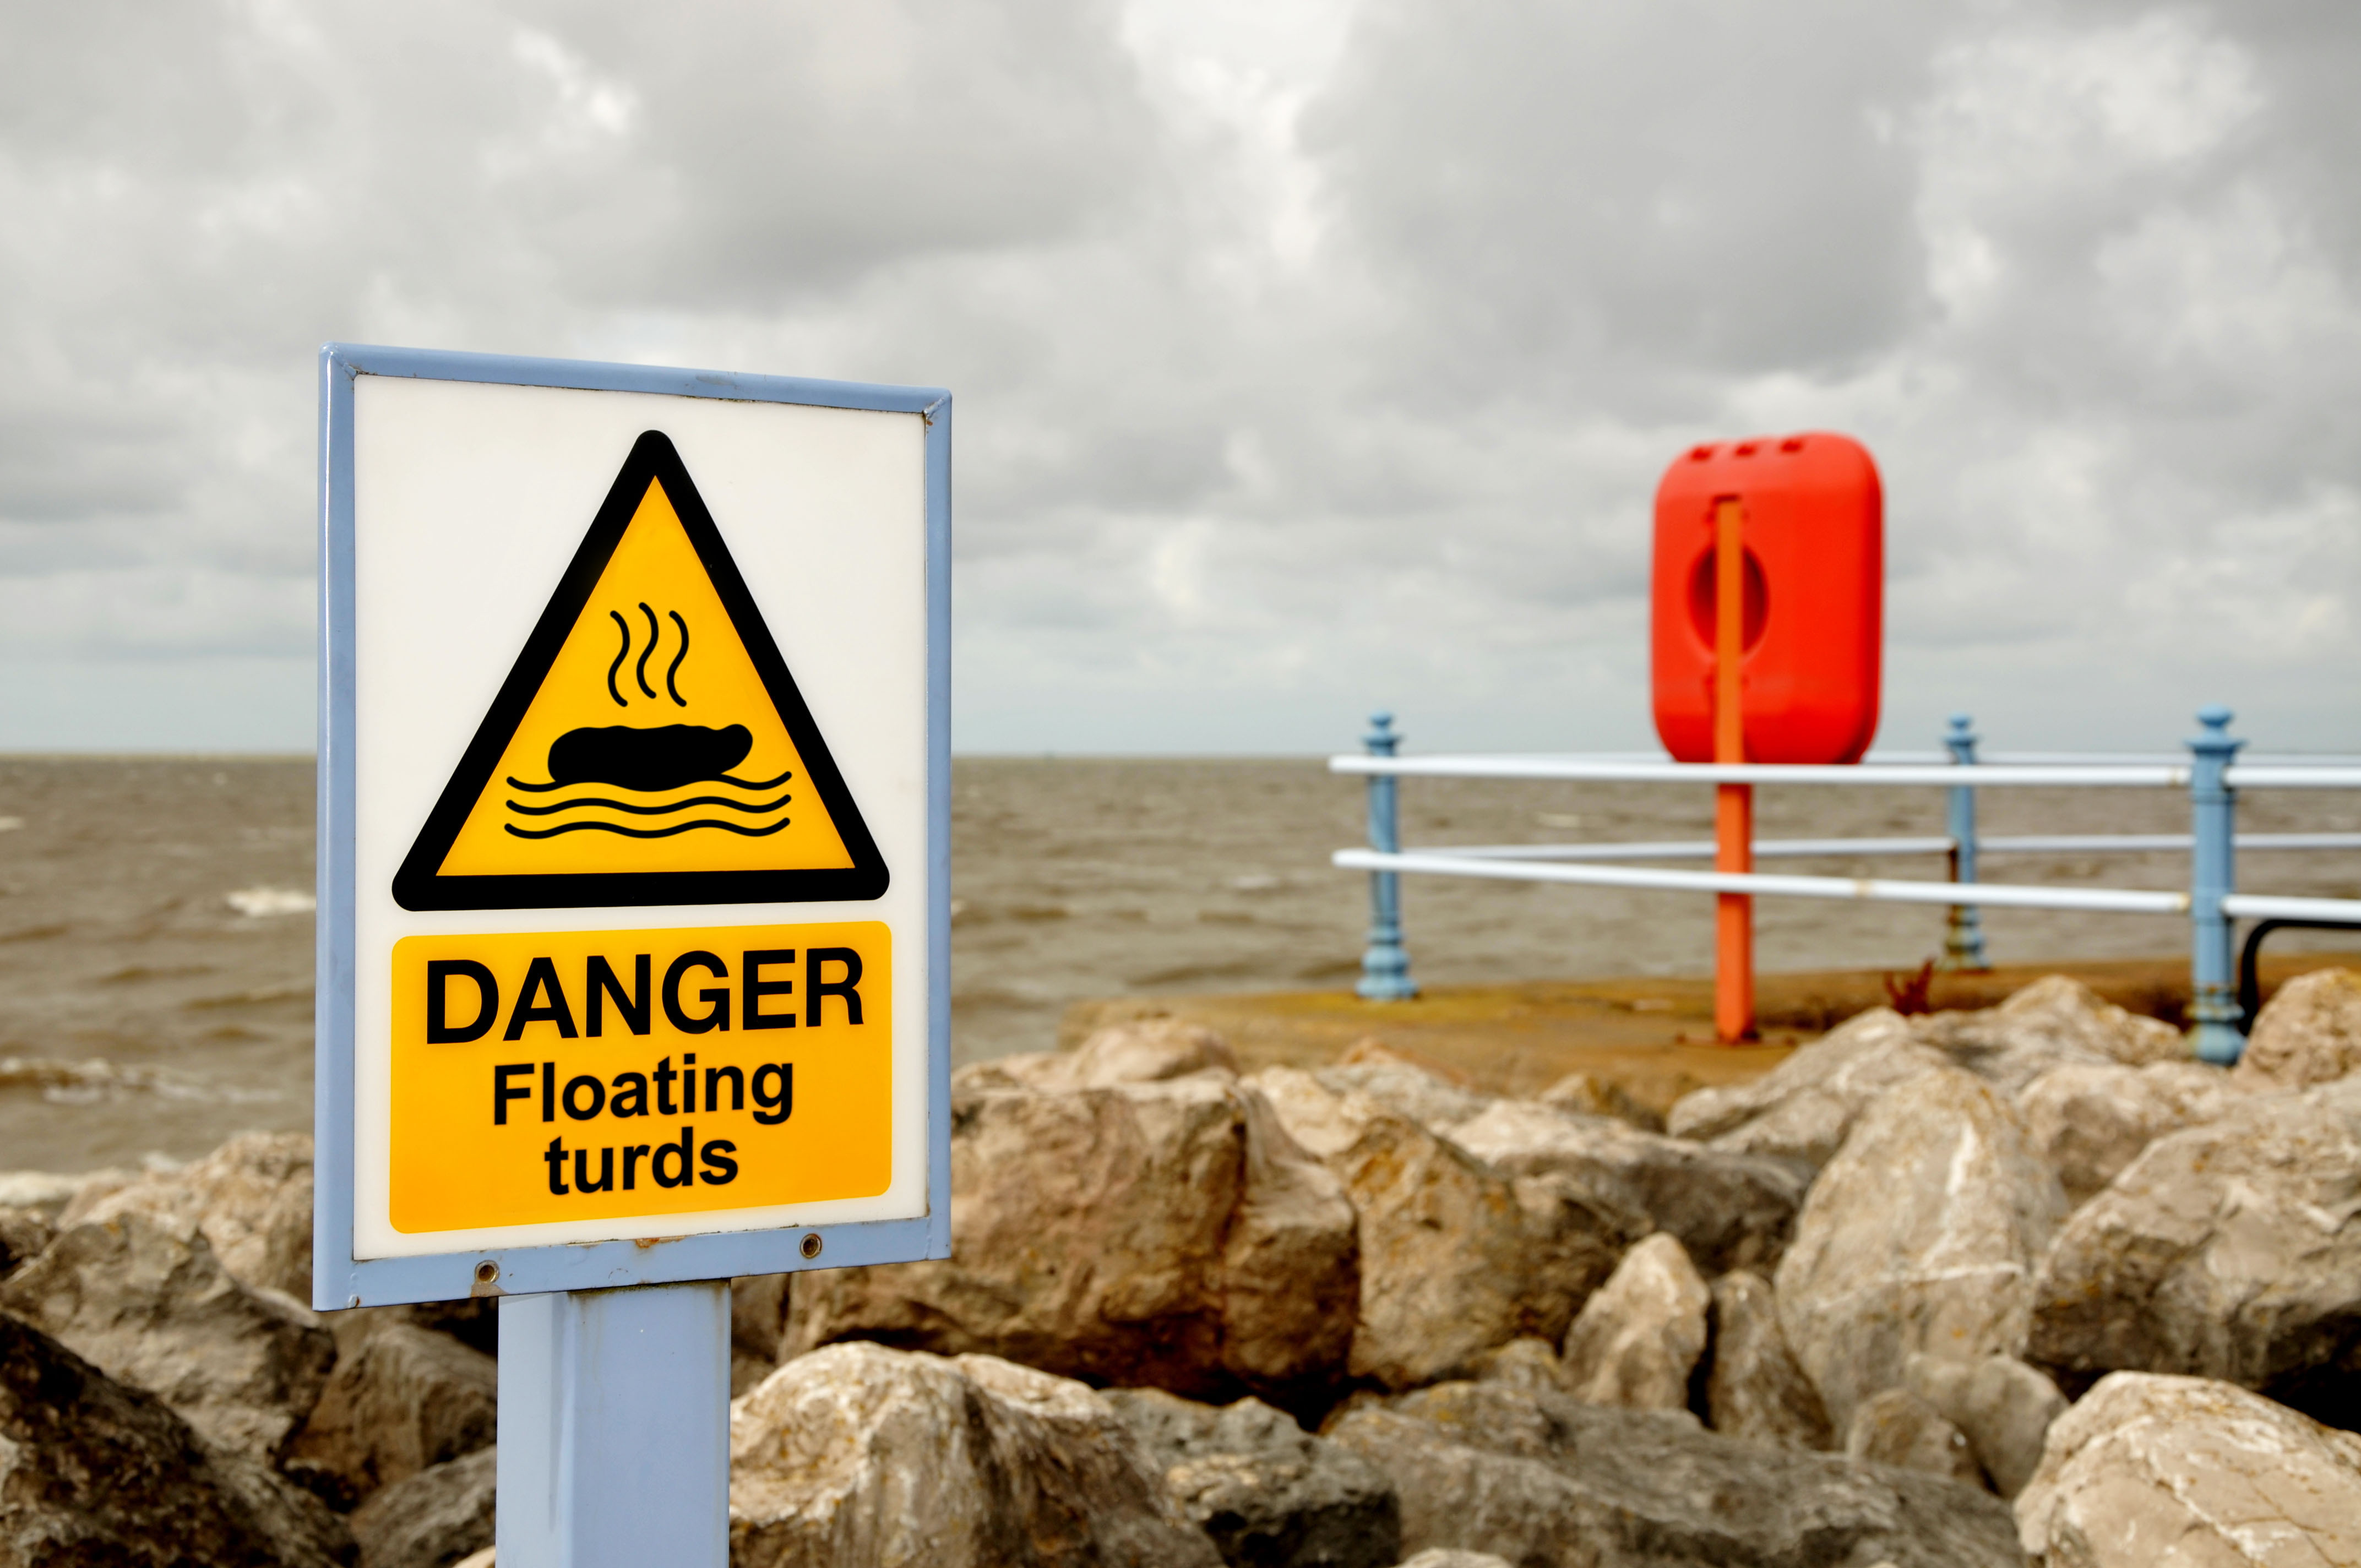 Floating turds warning sign in front of a cloudy beach